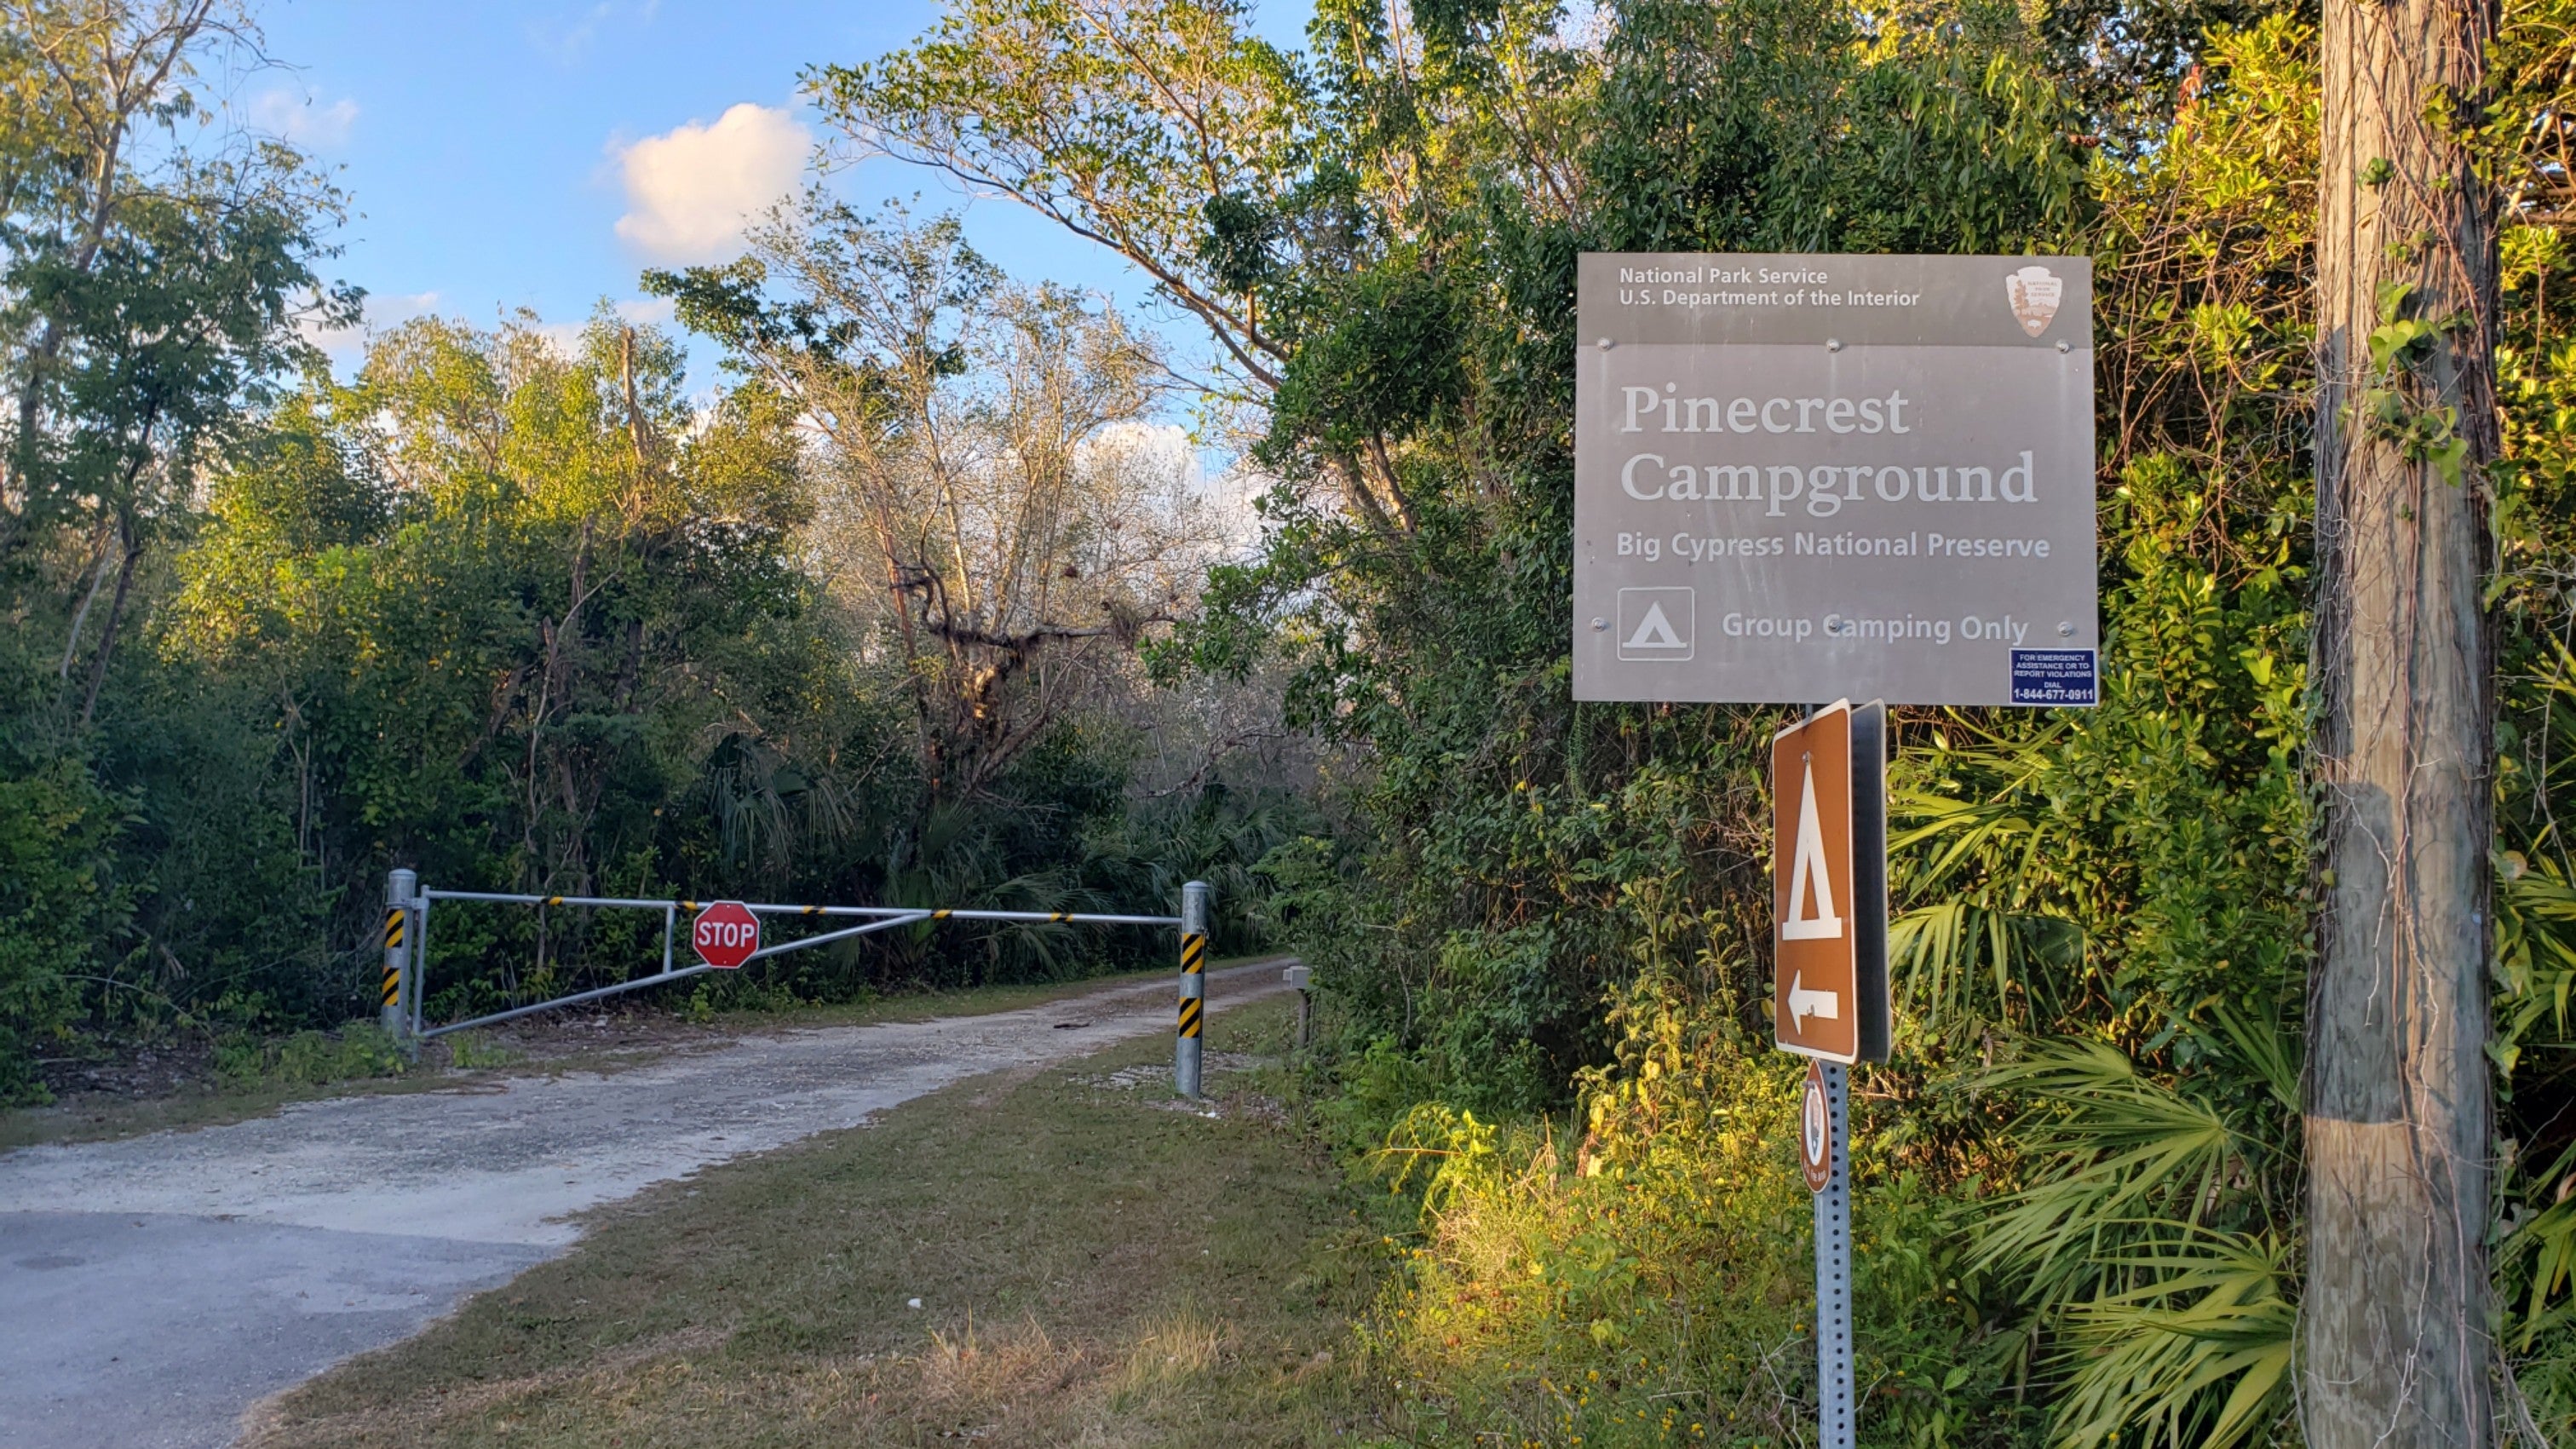 Campground entrance. Gate was locked, so I had to walk in.